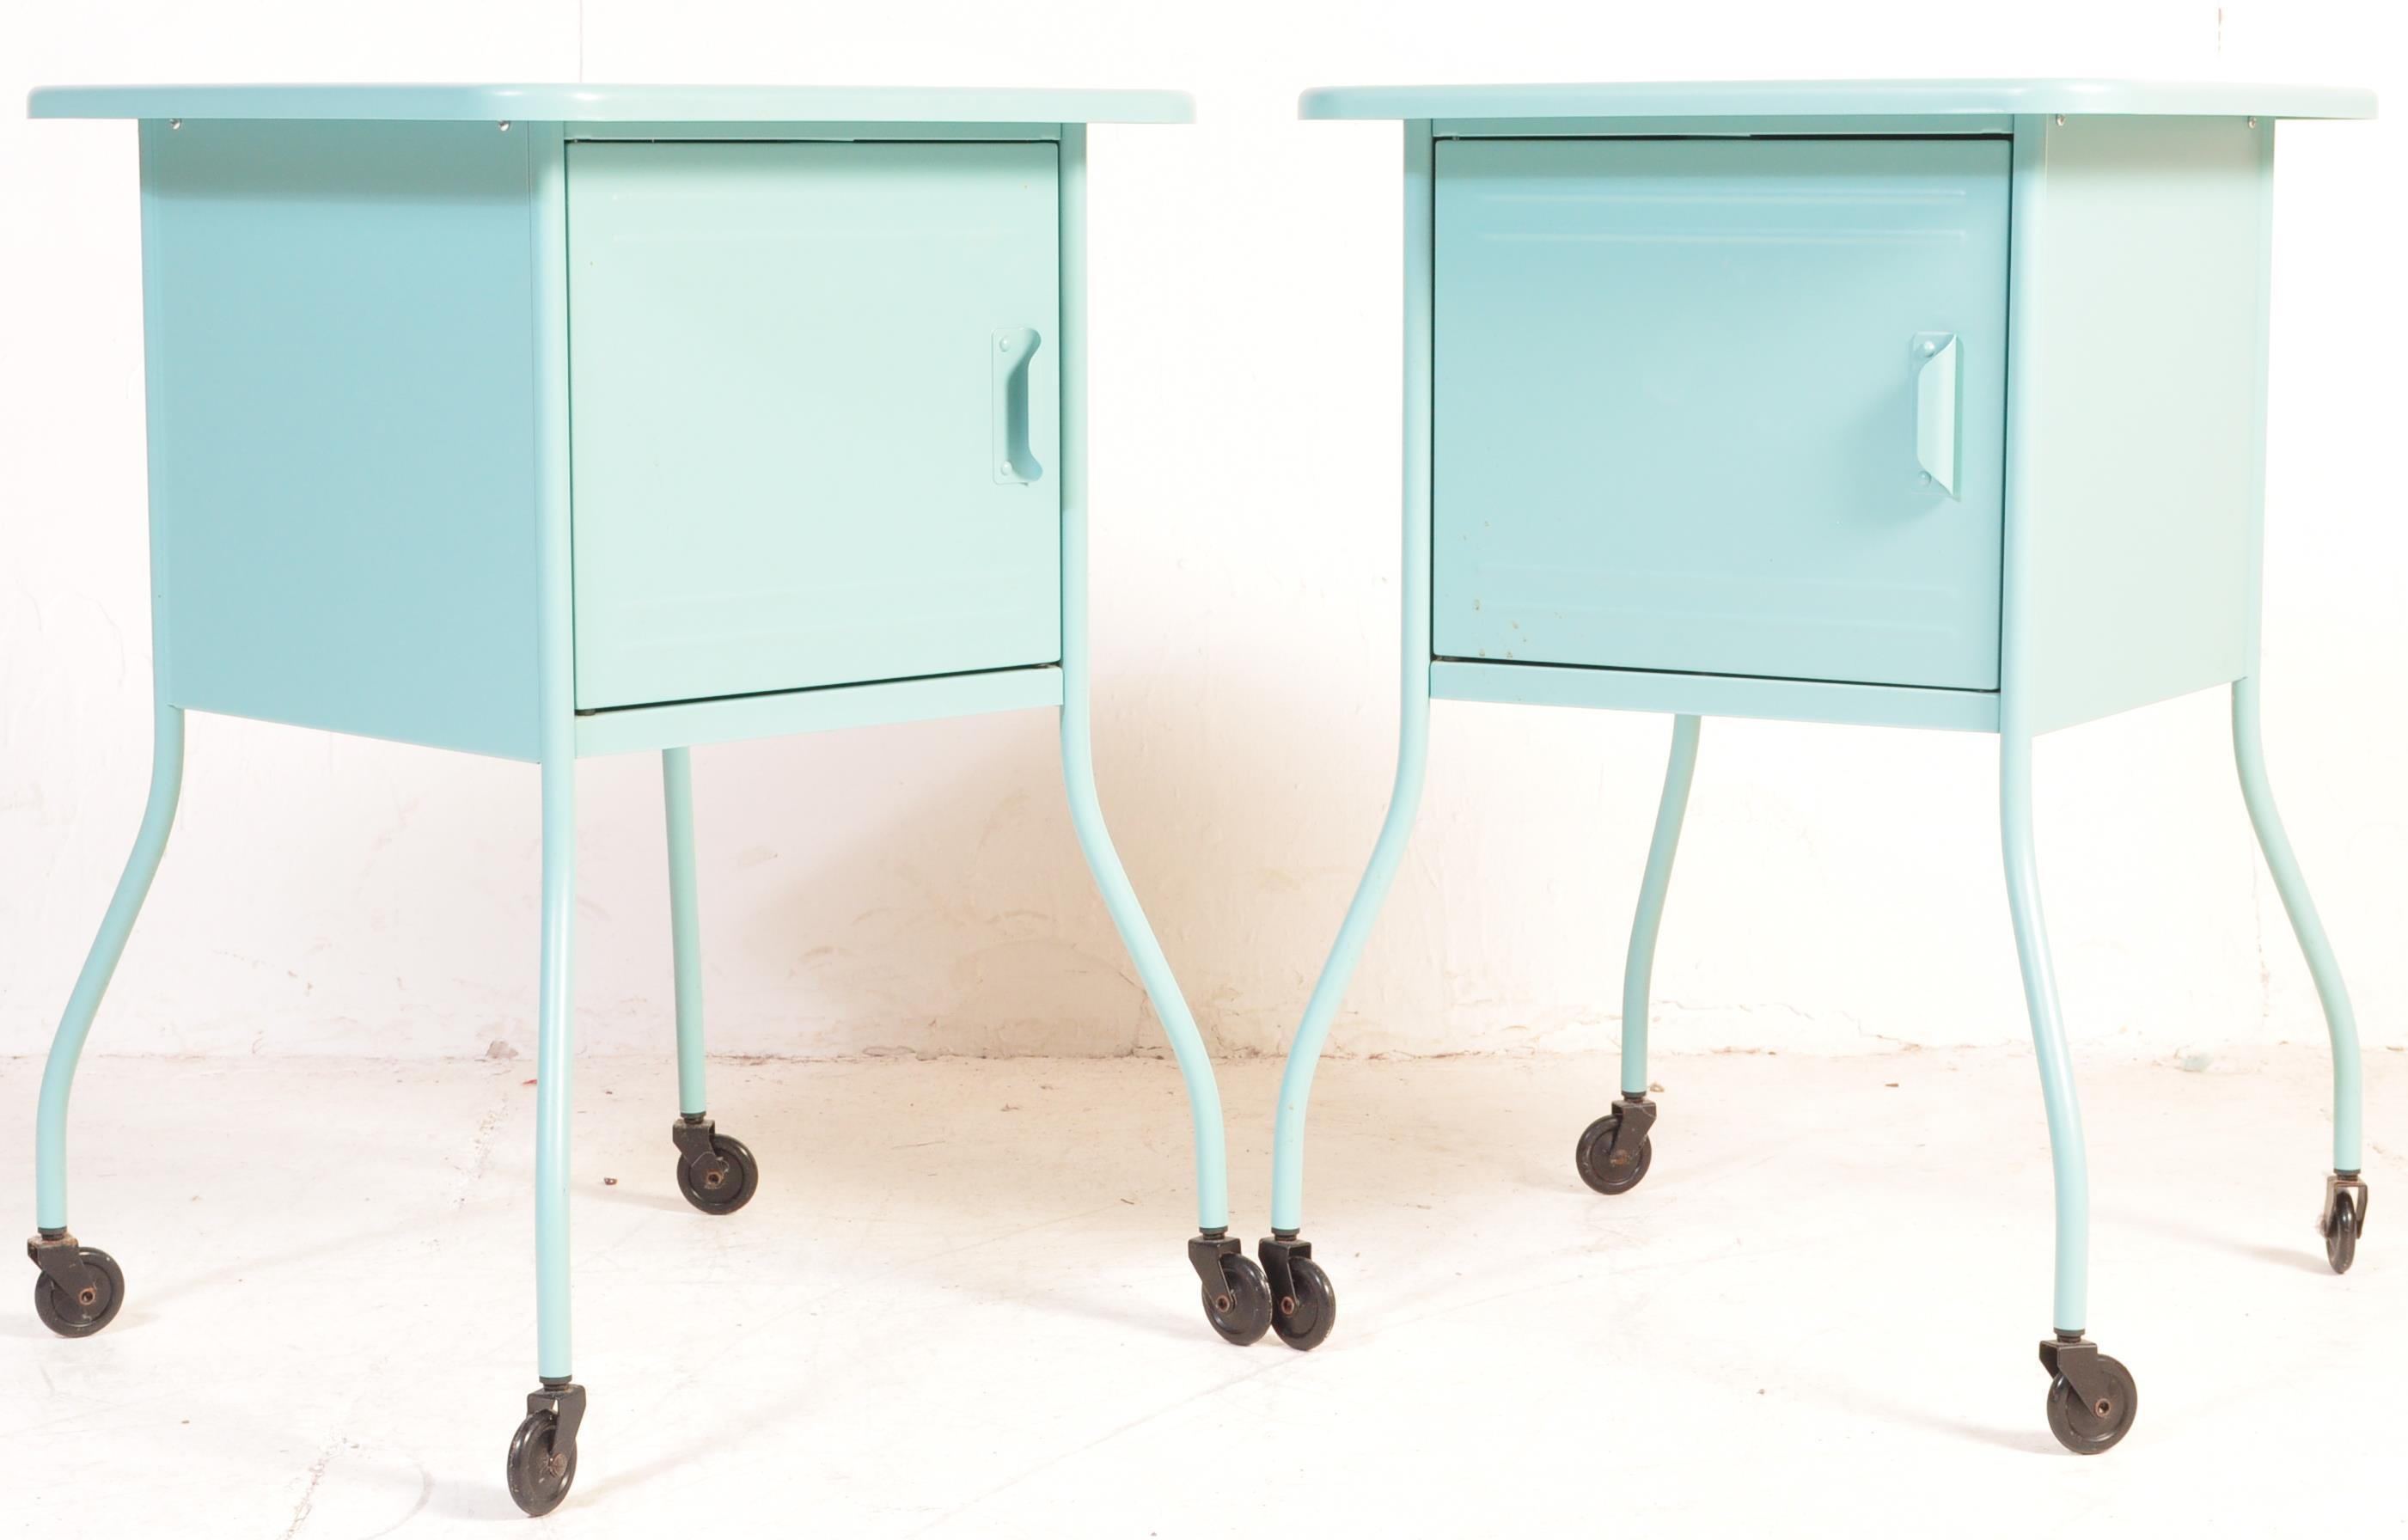 PAIR OF RETRO STYLE PRESSED METAL TIN BEDSIDE TABLES